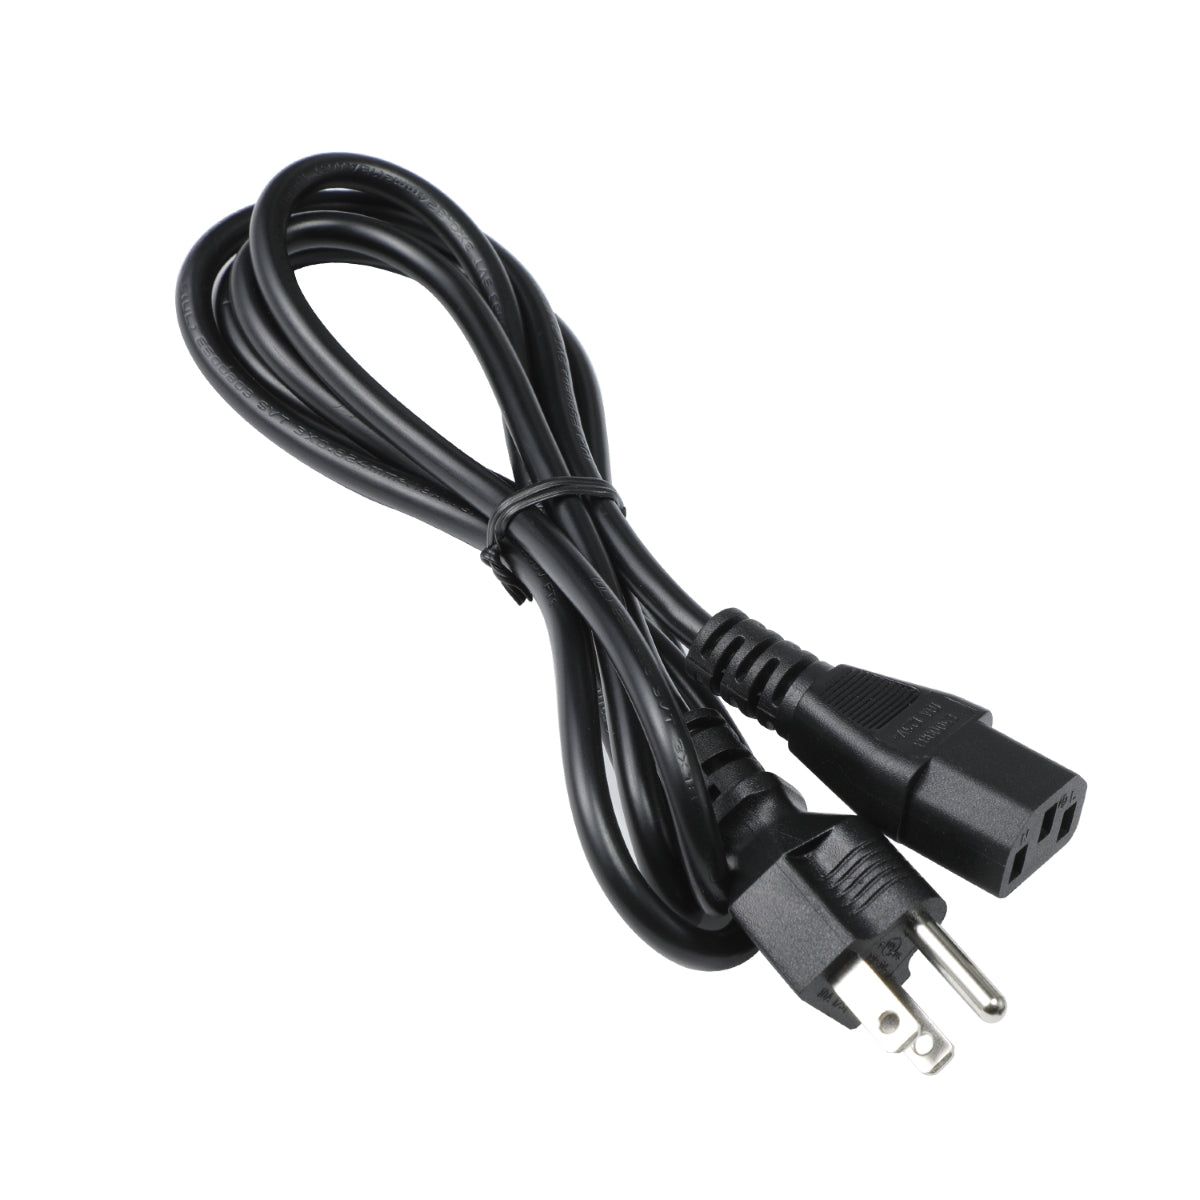 Power Cord for Acer VG220Q Monitor.